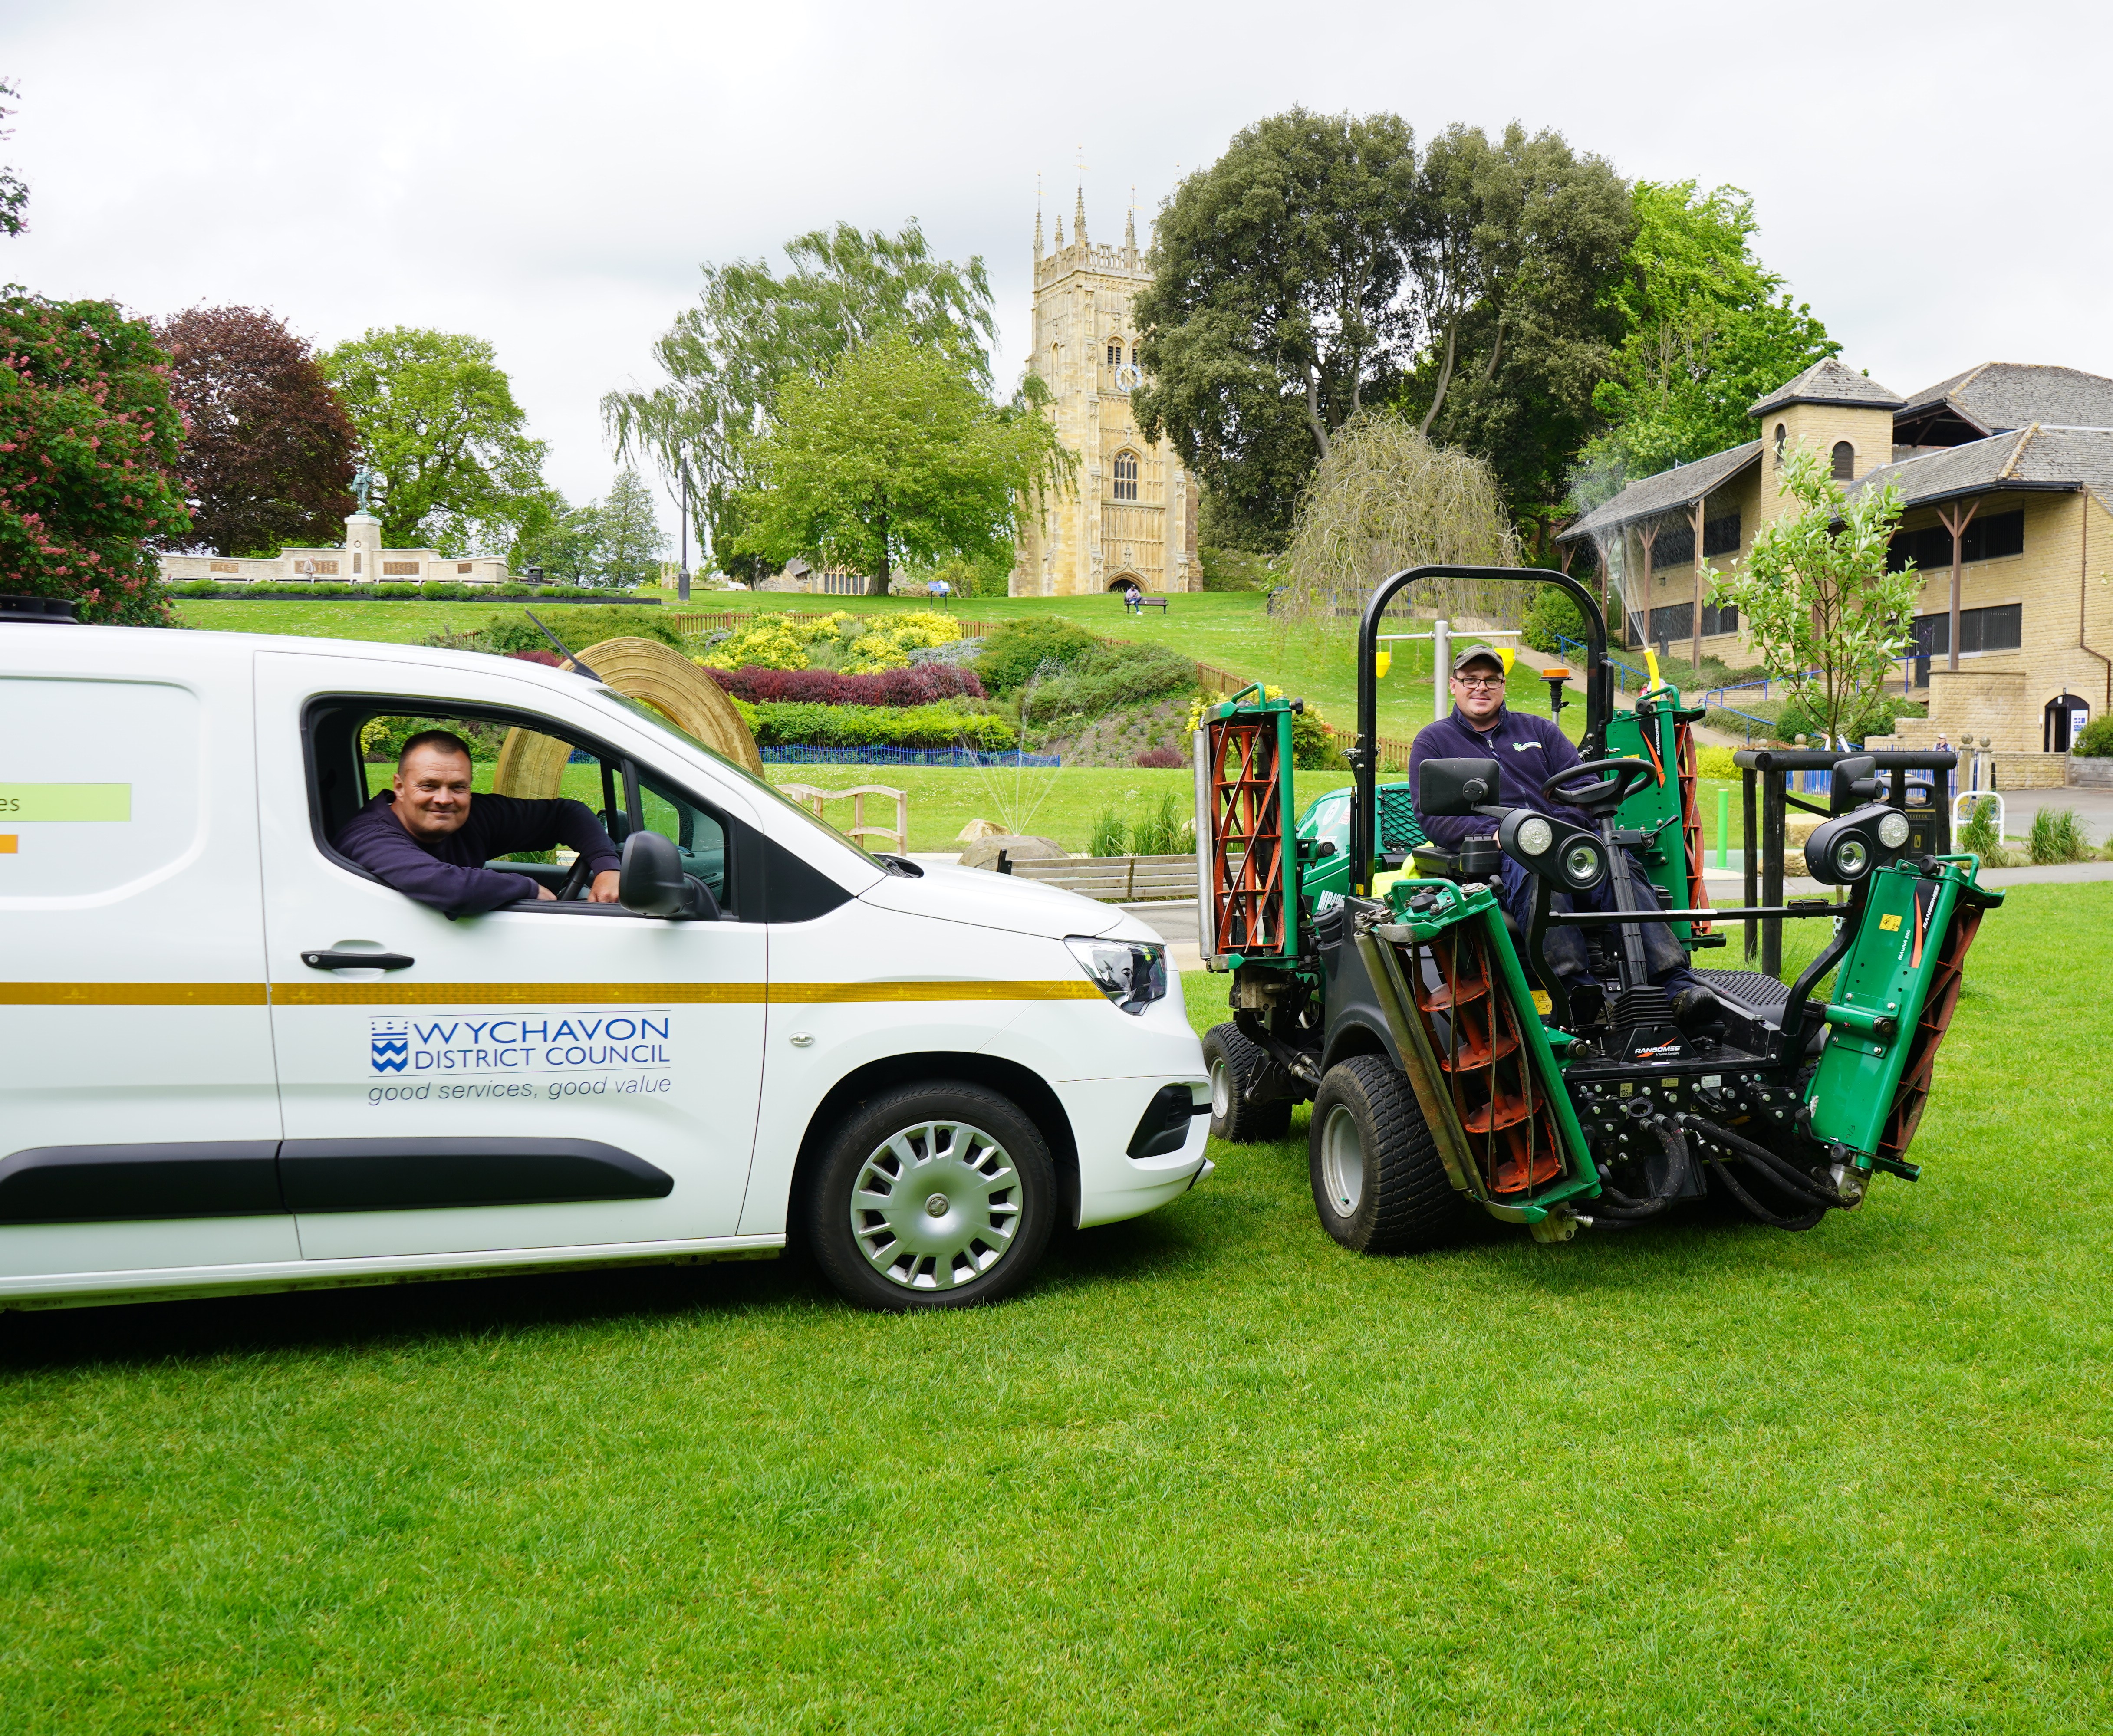 A man sat in van and a man sat on a mower.